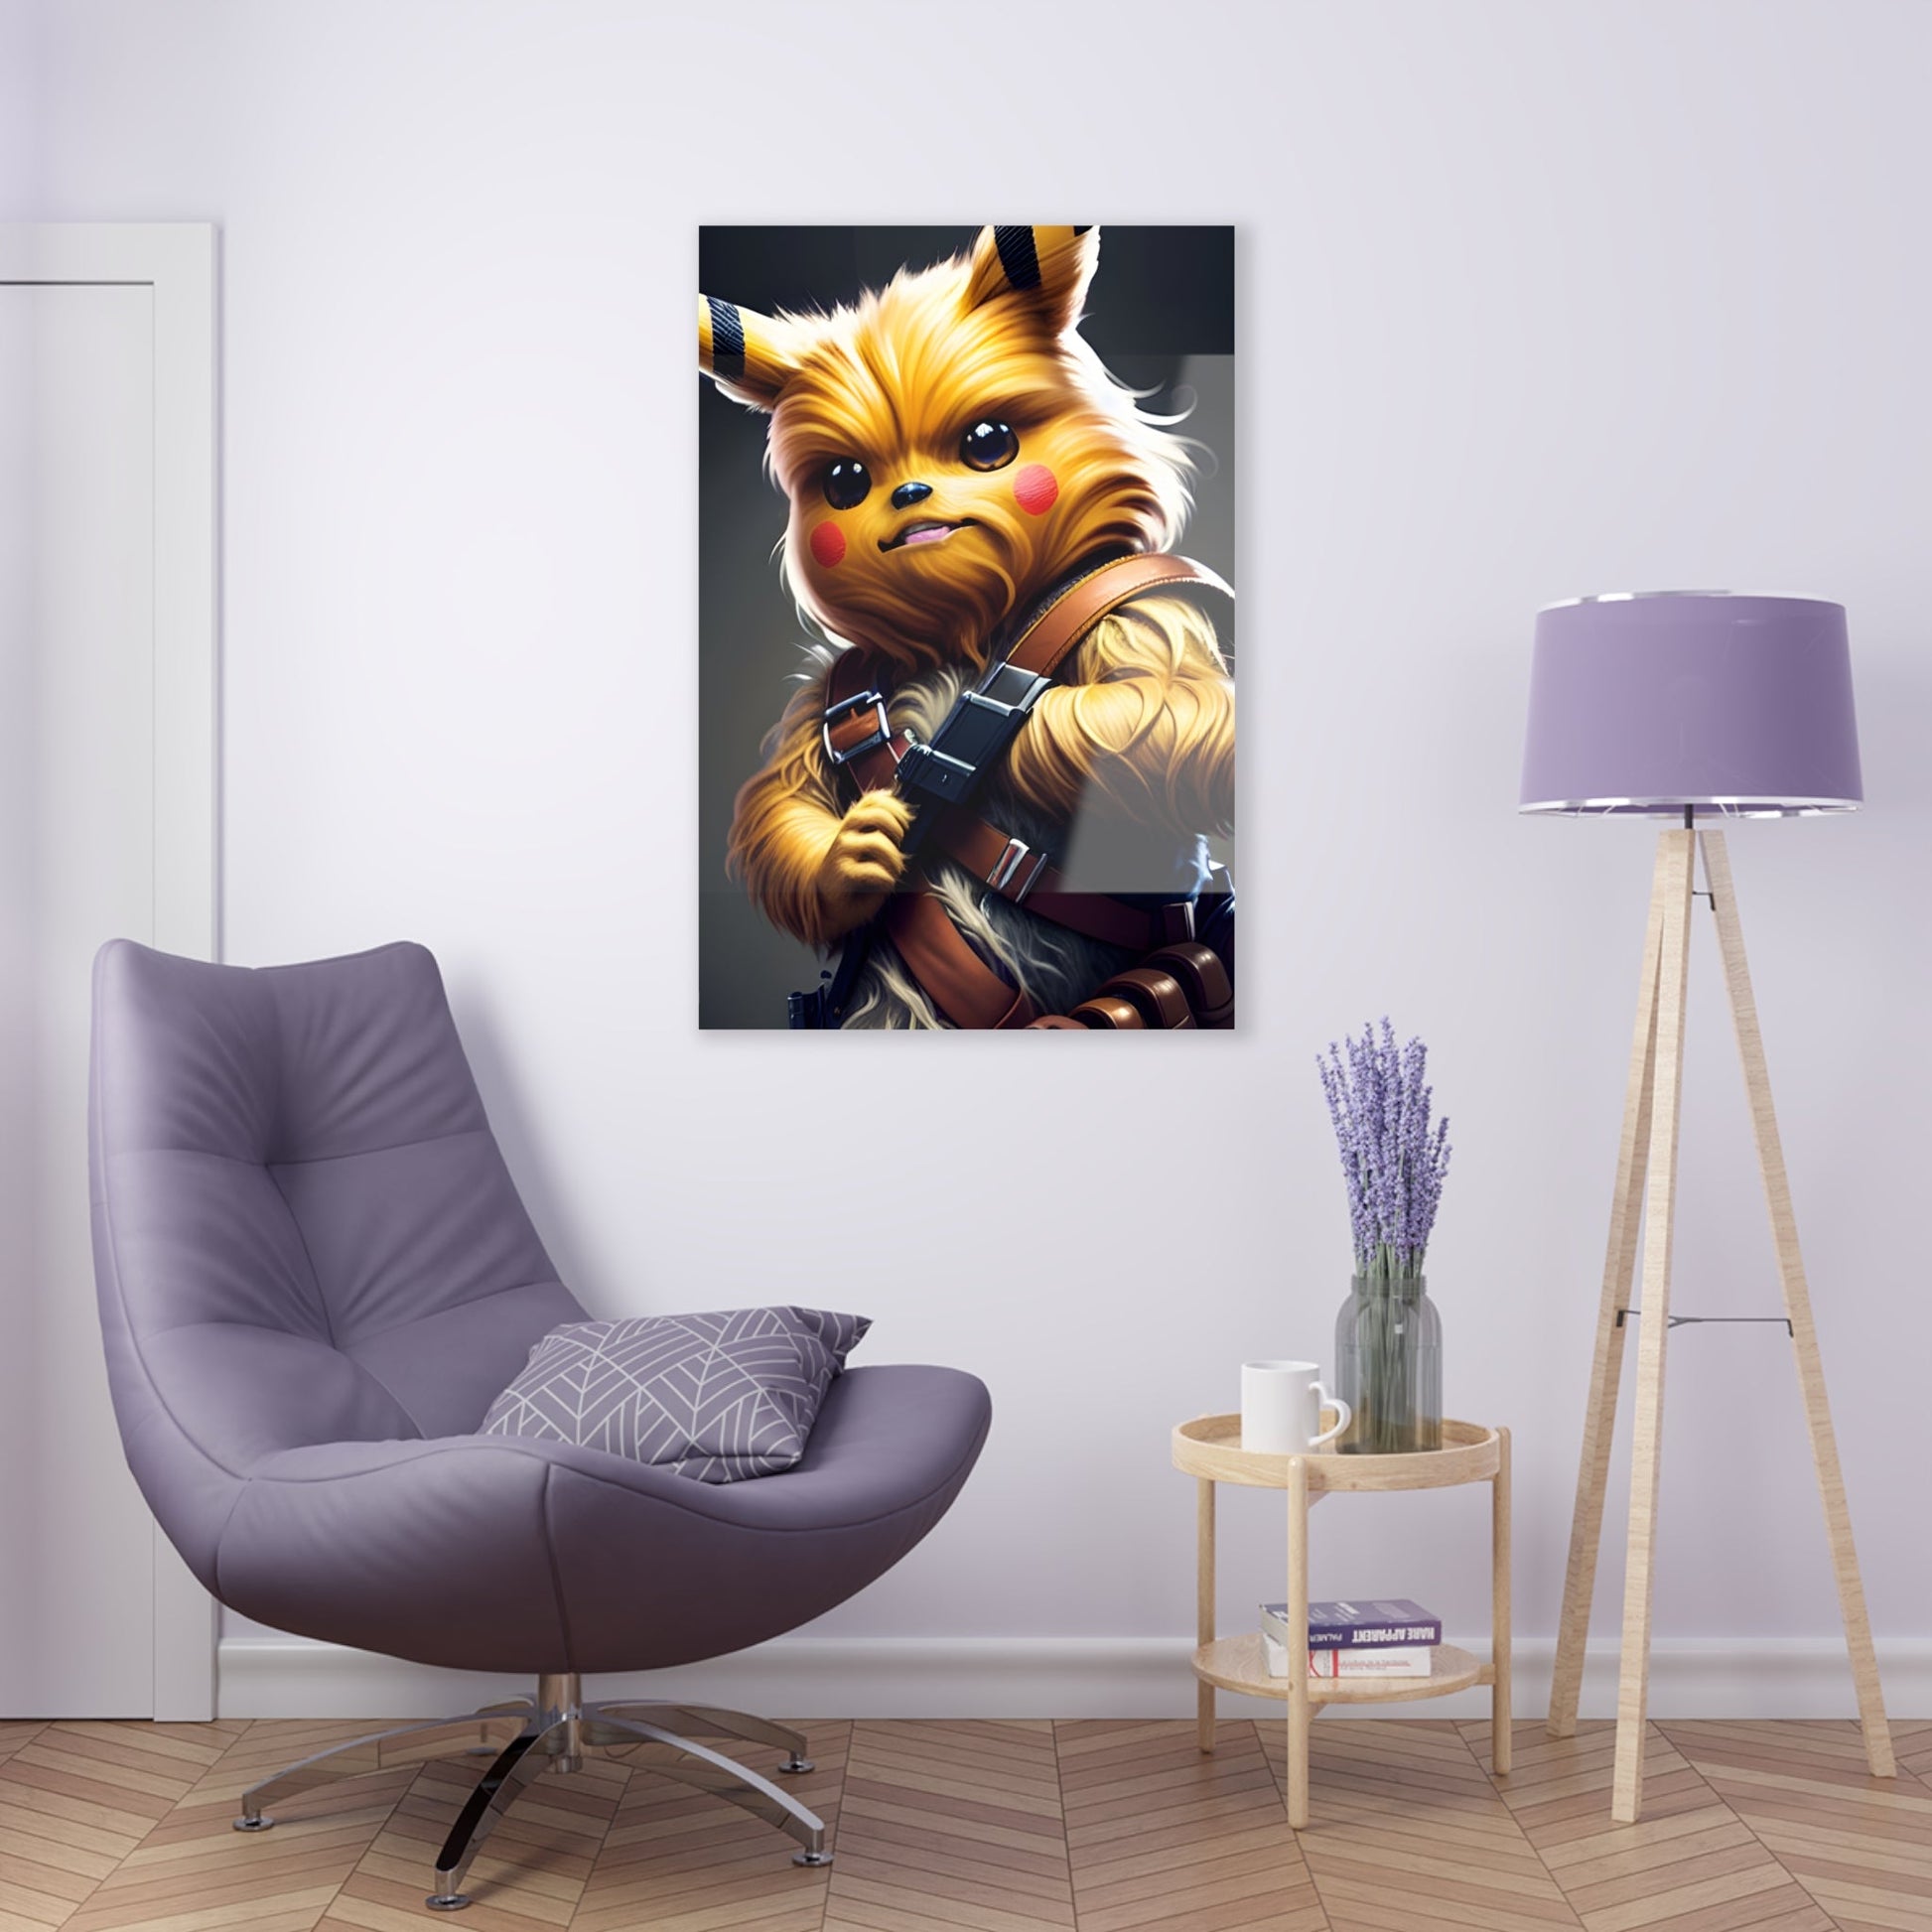 Chewbacchu Acrylic Print hanging on a white door above a lavender comfy chair, lamp with a lavender shade on it and a small round coffee table with a coffee mug and lavender plant in a mason jar.